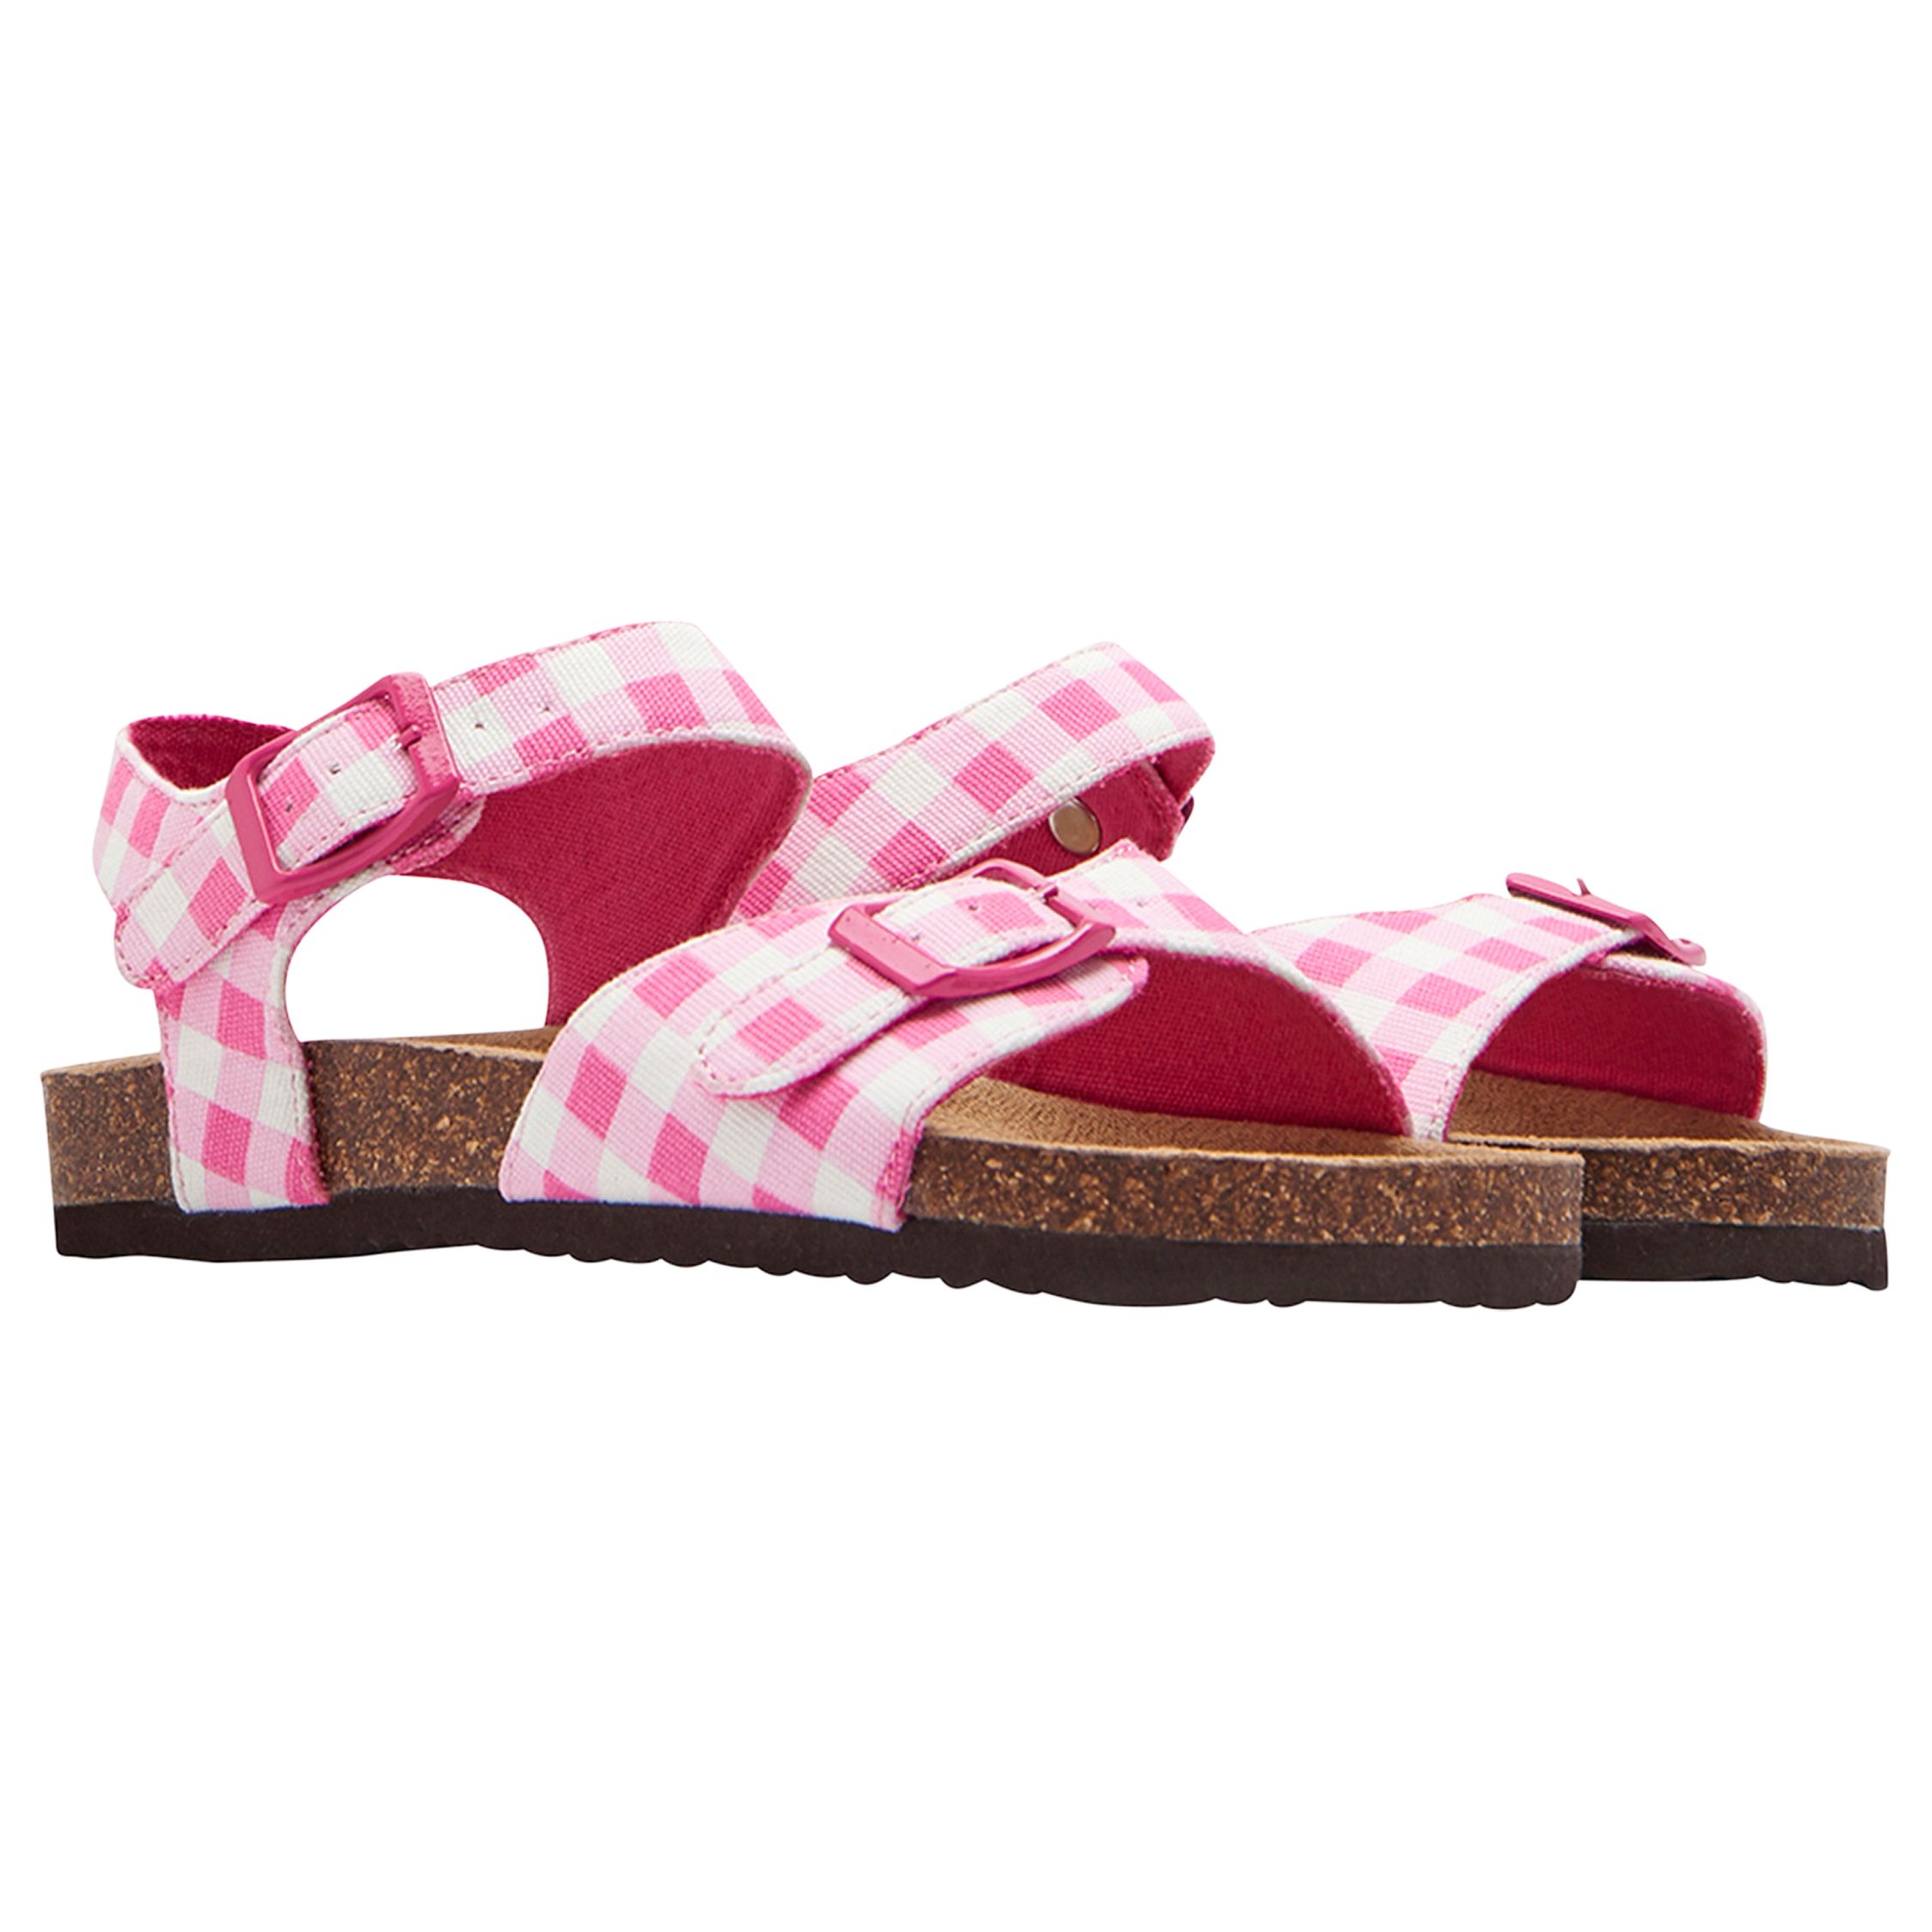 Little Joule Children's Gingham Tippy Toes Sandals, Pink, 2